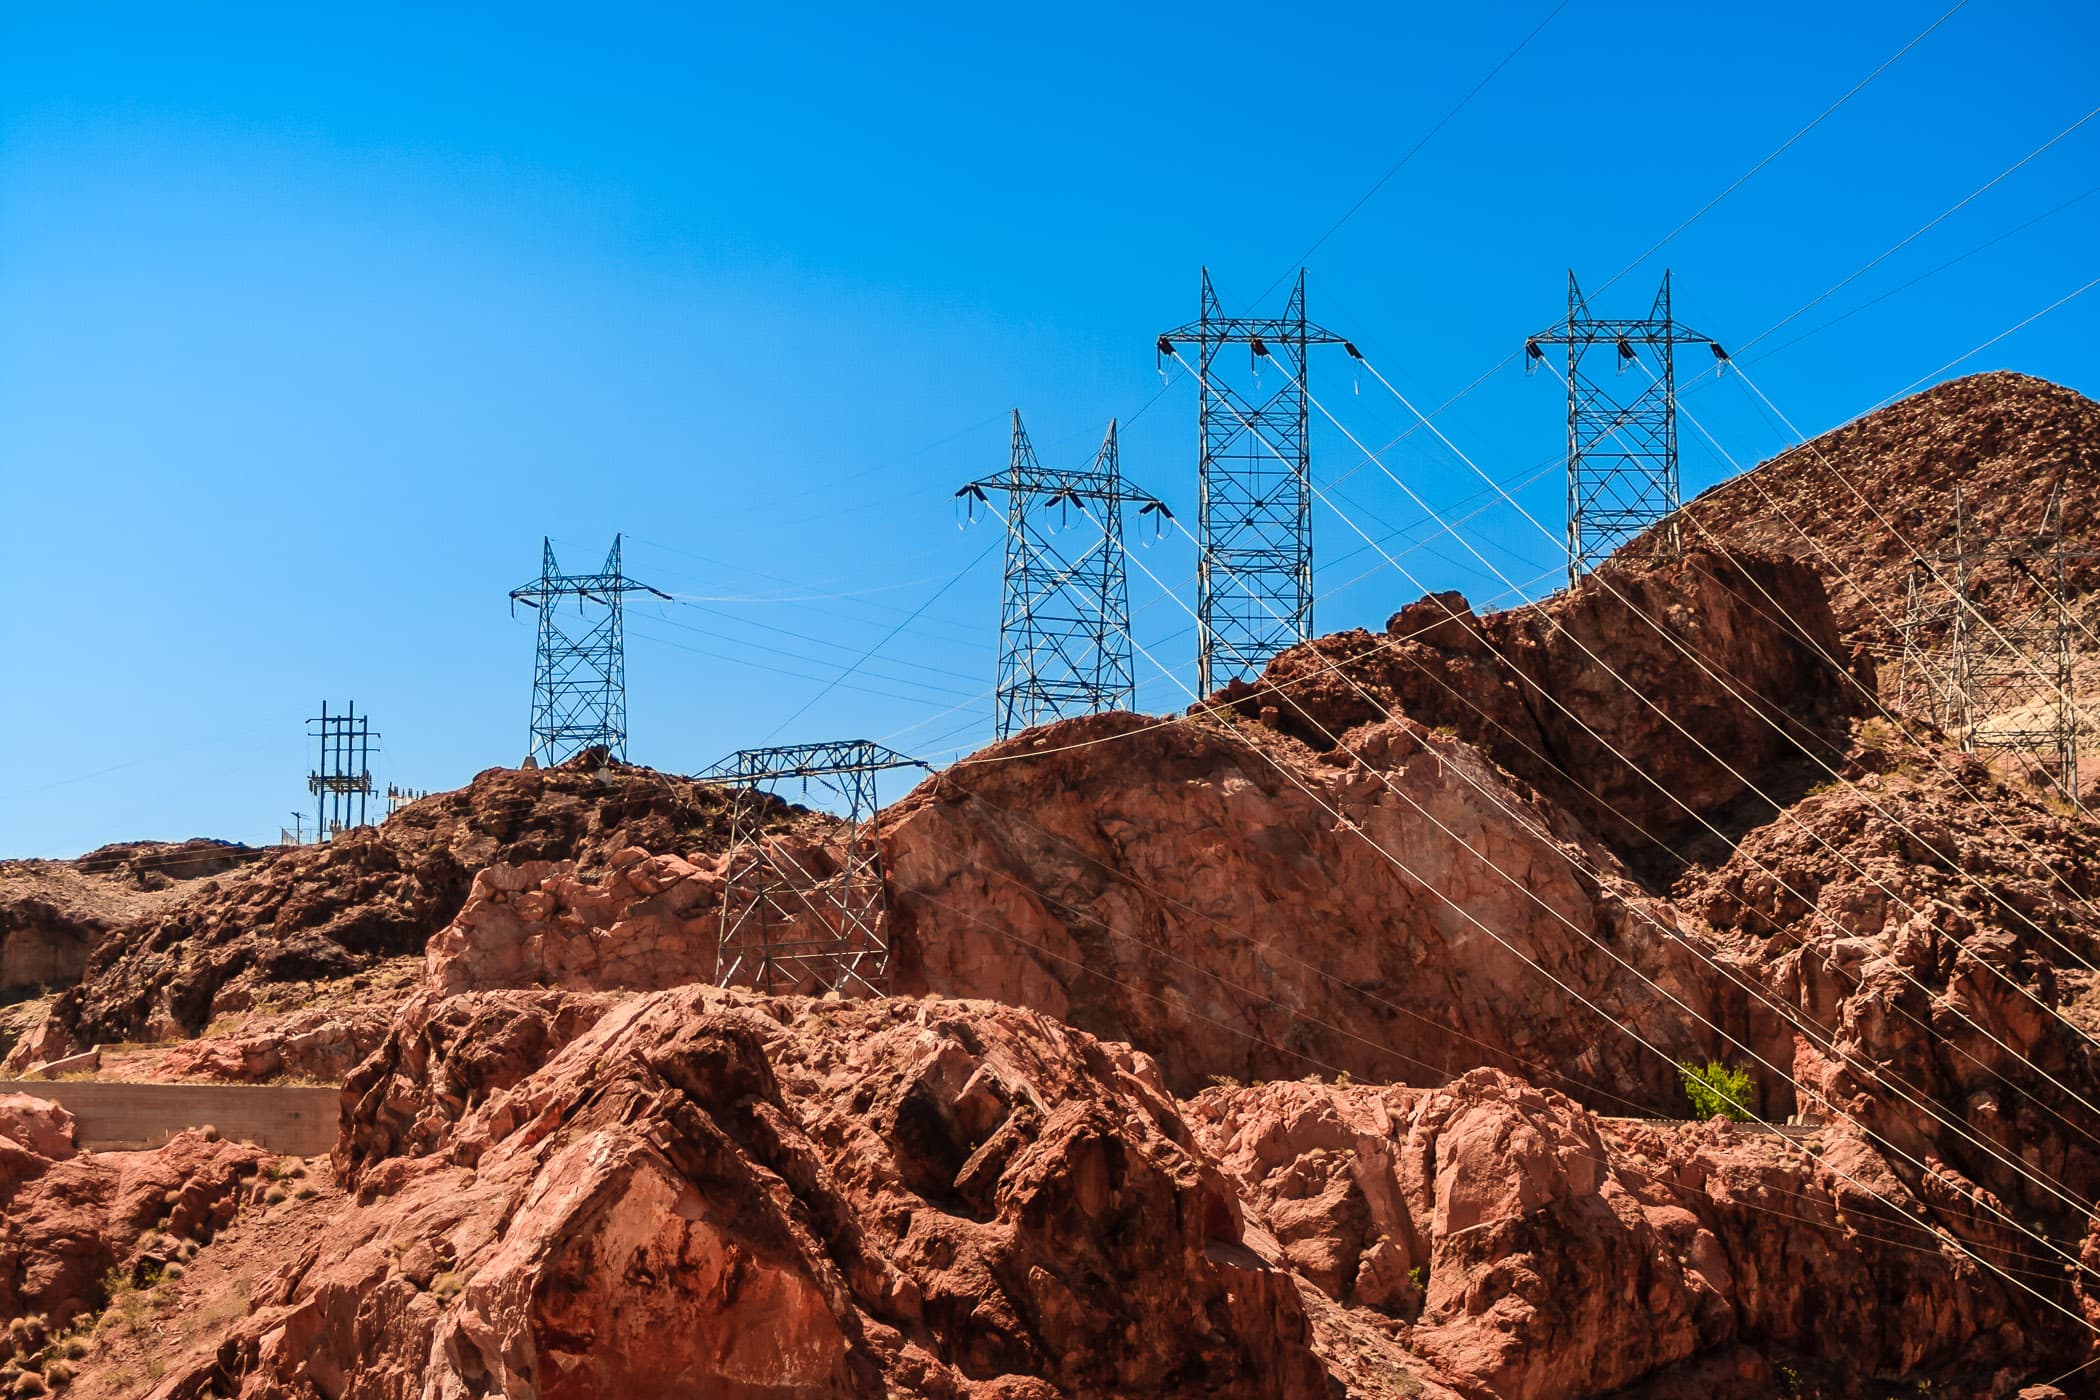 These power lines carry freshly-generated electricity away from Hoover Dam to distant destinations.